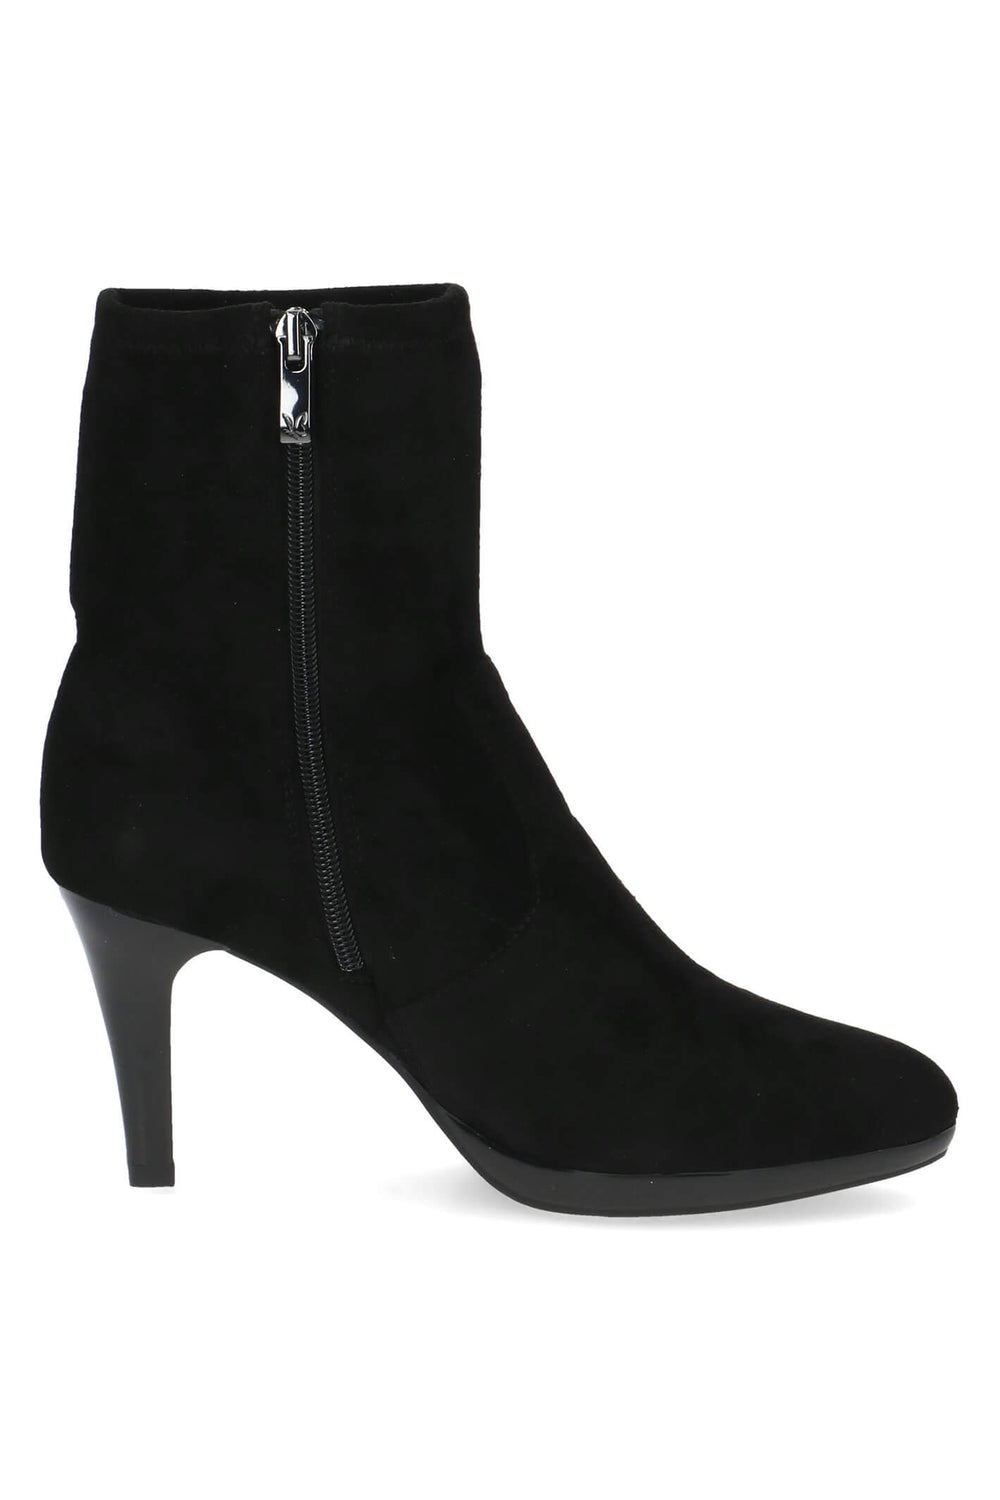 Caprice Ashley 9-25338-41-044 Black Stretch Ankle Boots - Rouge Boutique